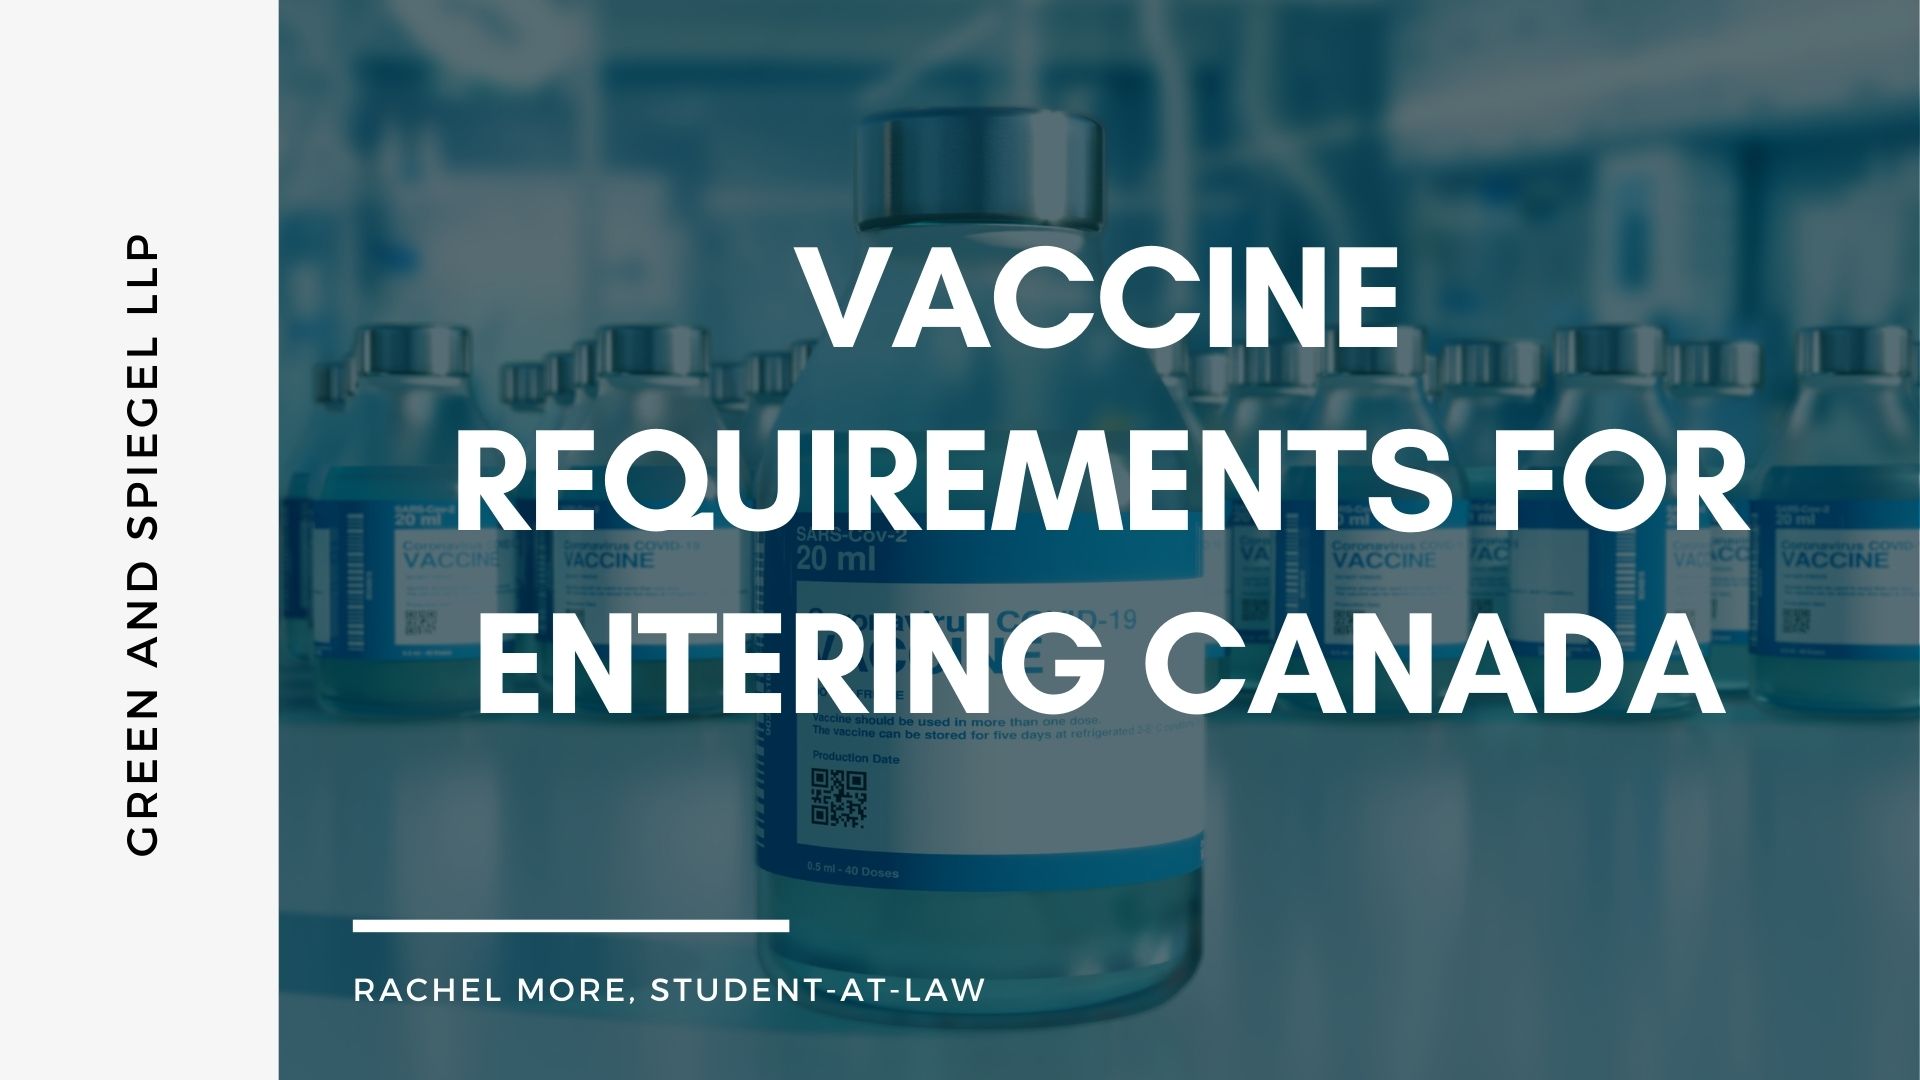 Vaccine Requirements for Entering Canada